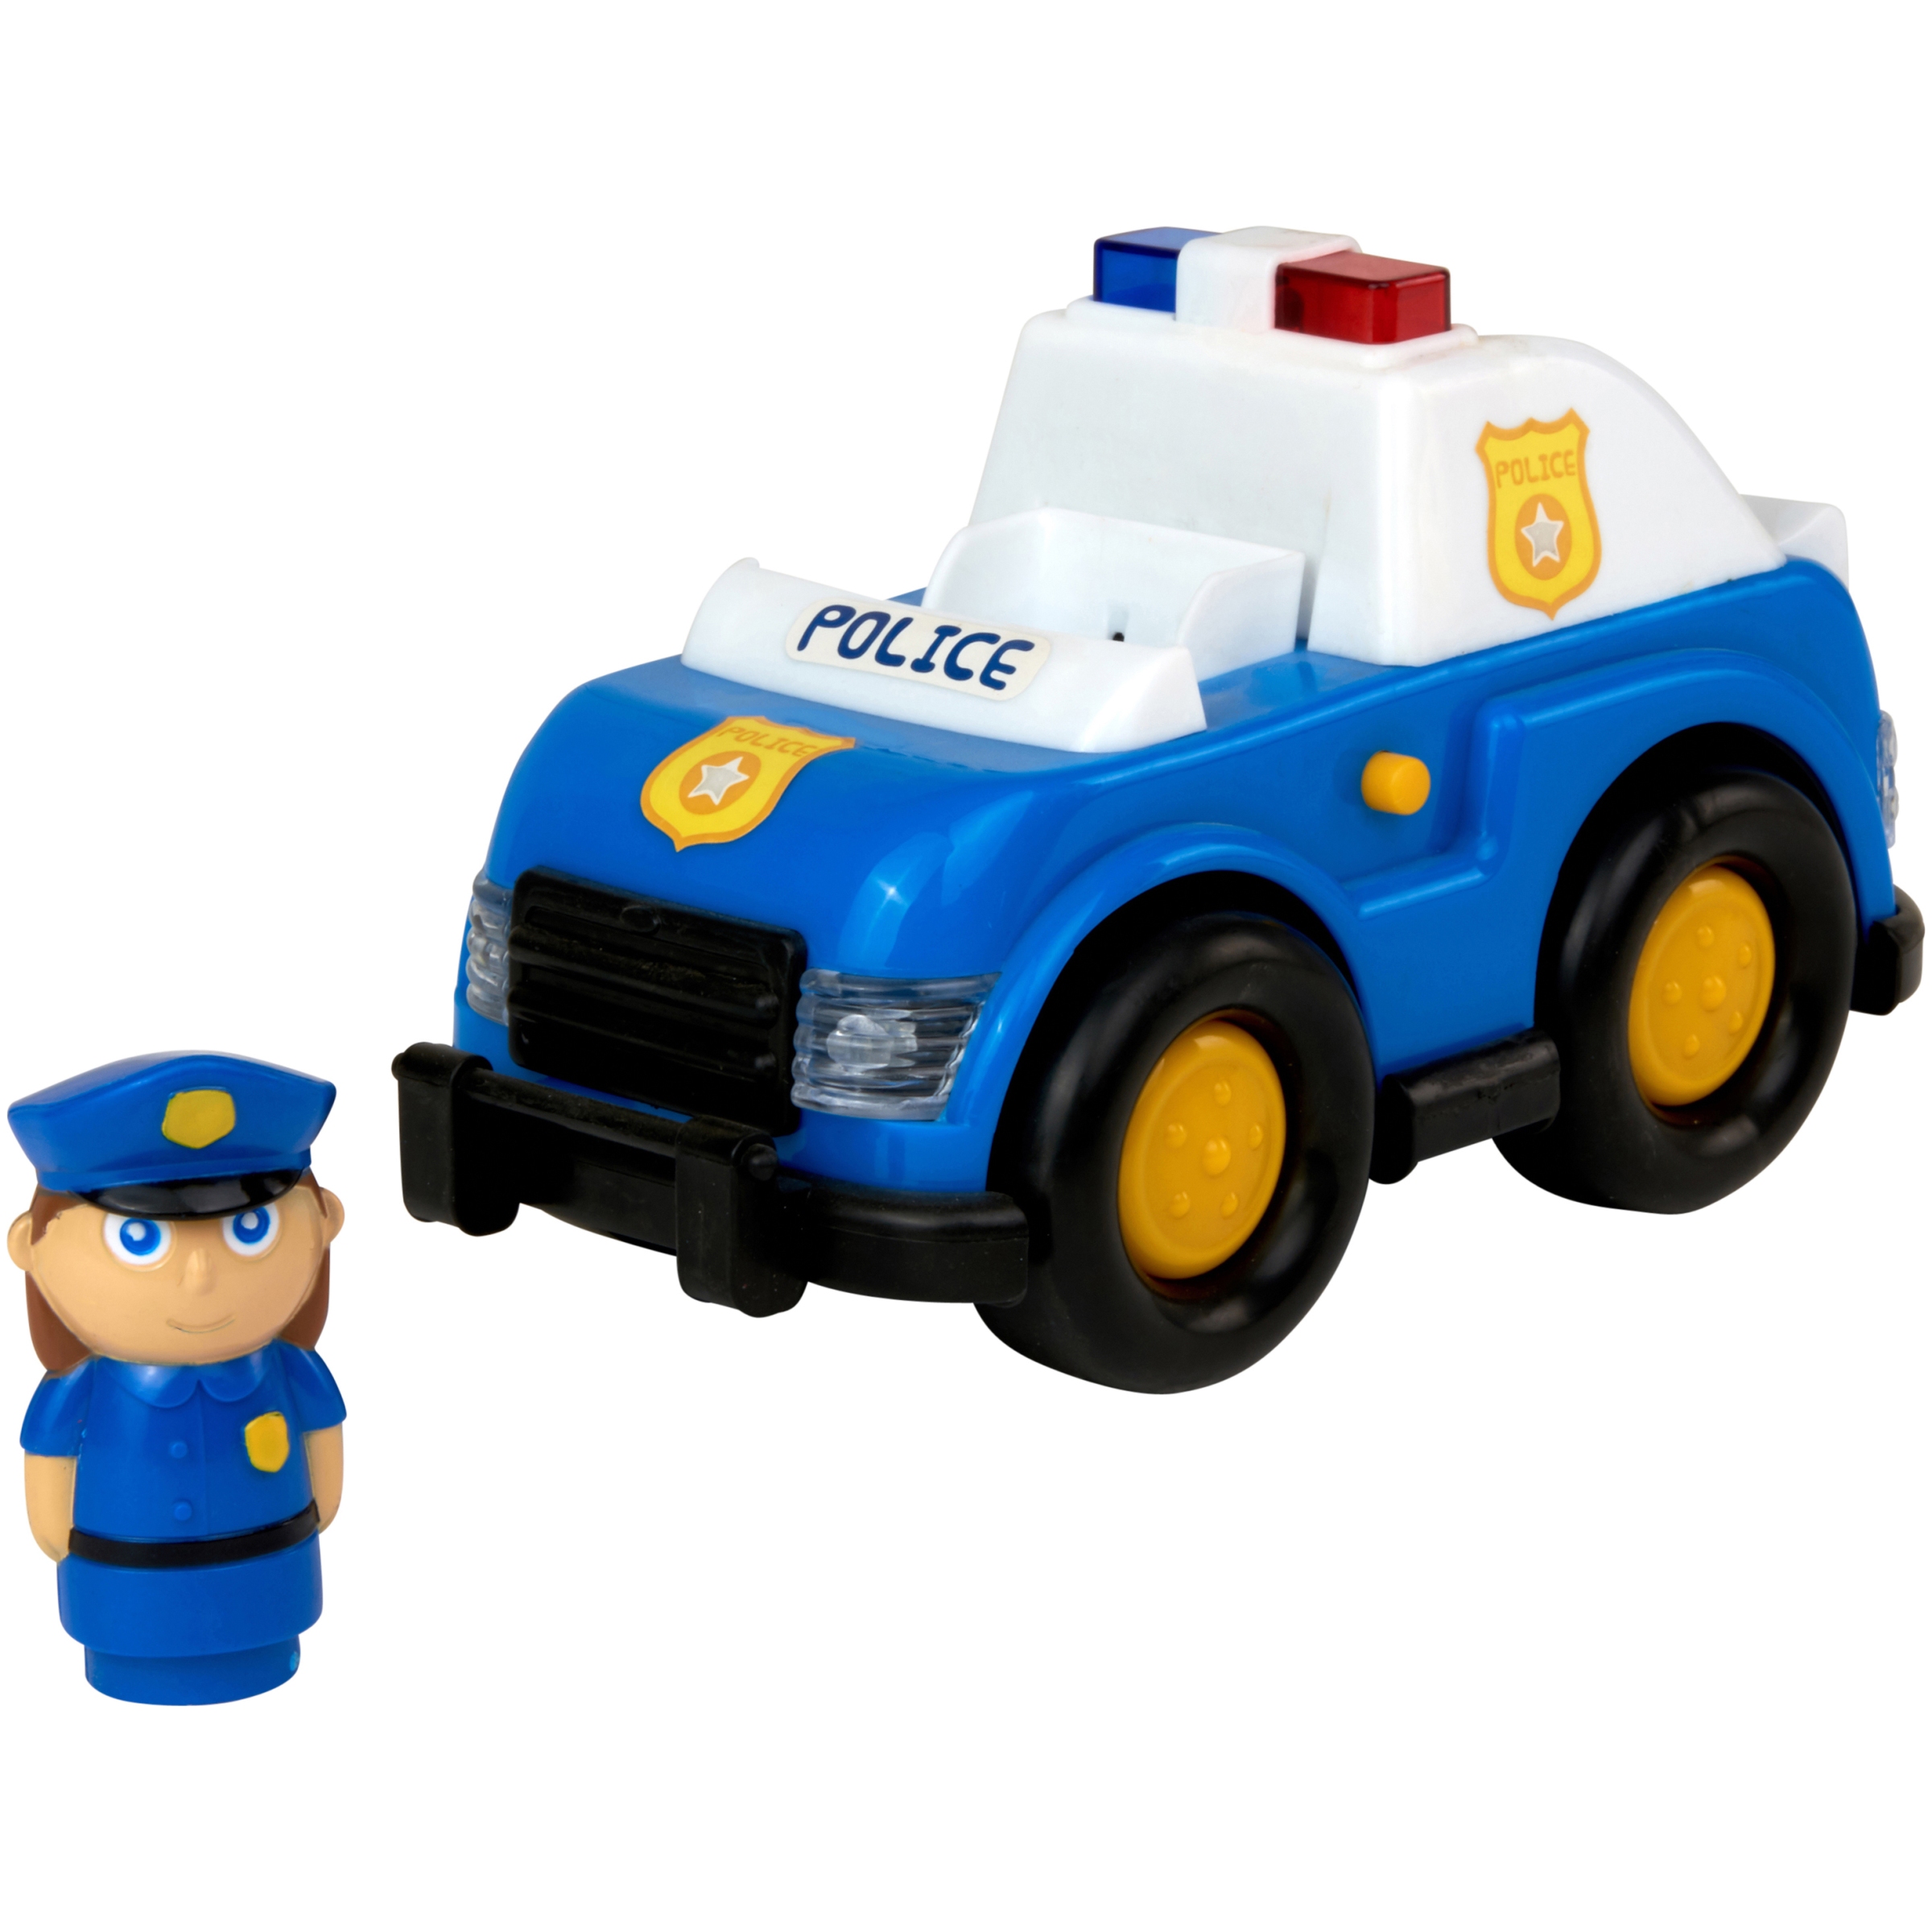 Kid Connection My First Vehicle Toy Car with Action Figure Police Vehicle Playset (2 Pieces) - image 1 of 4